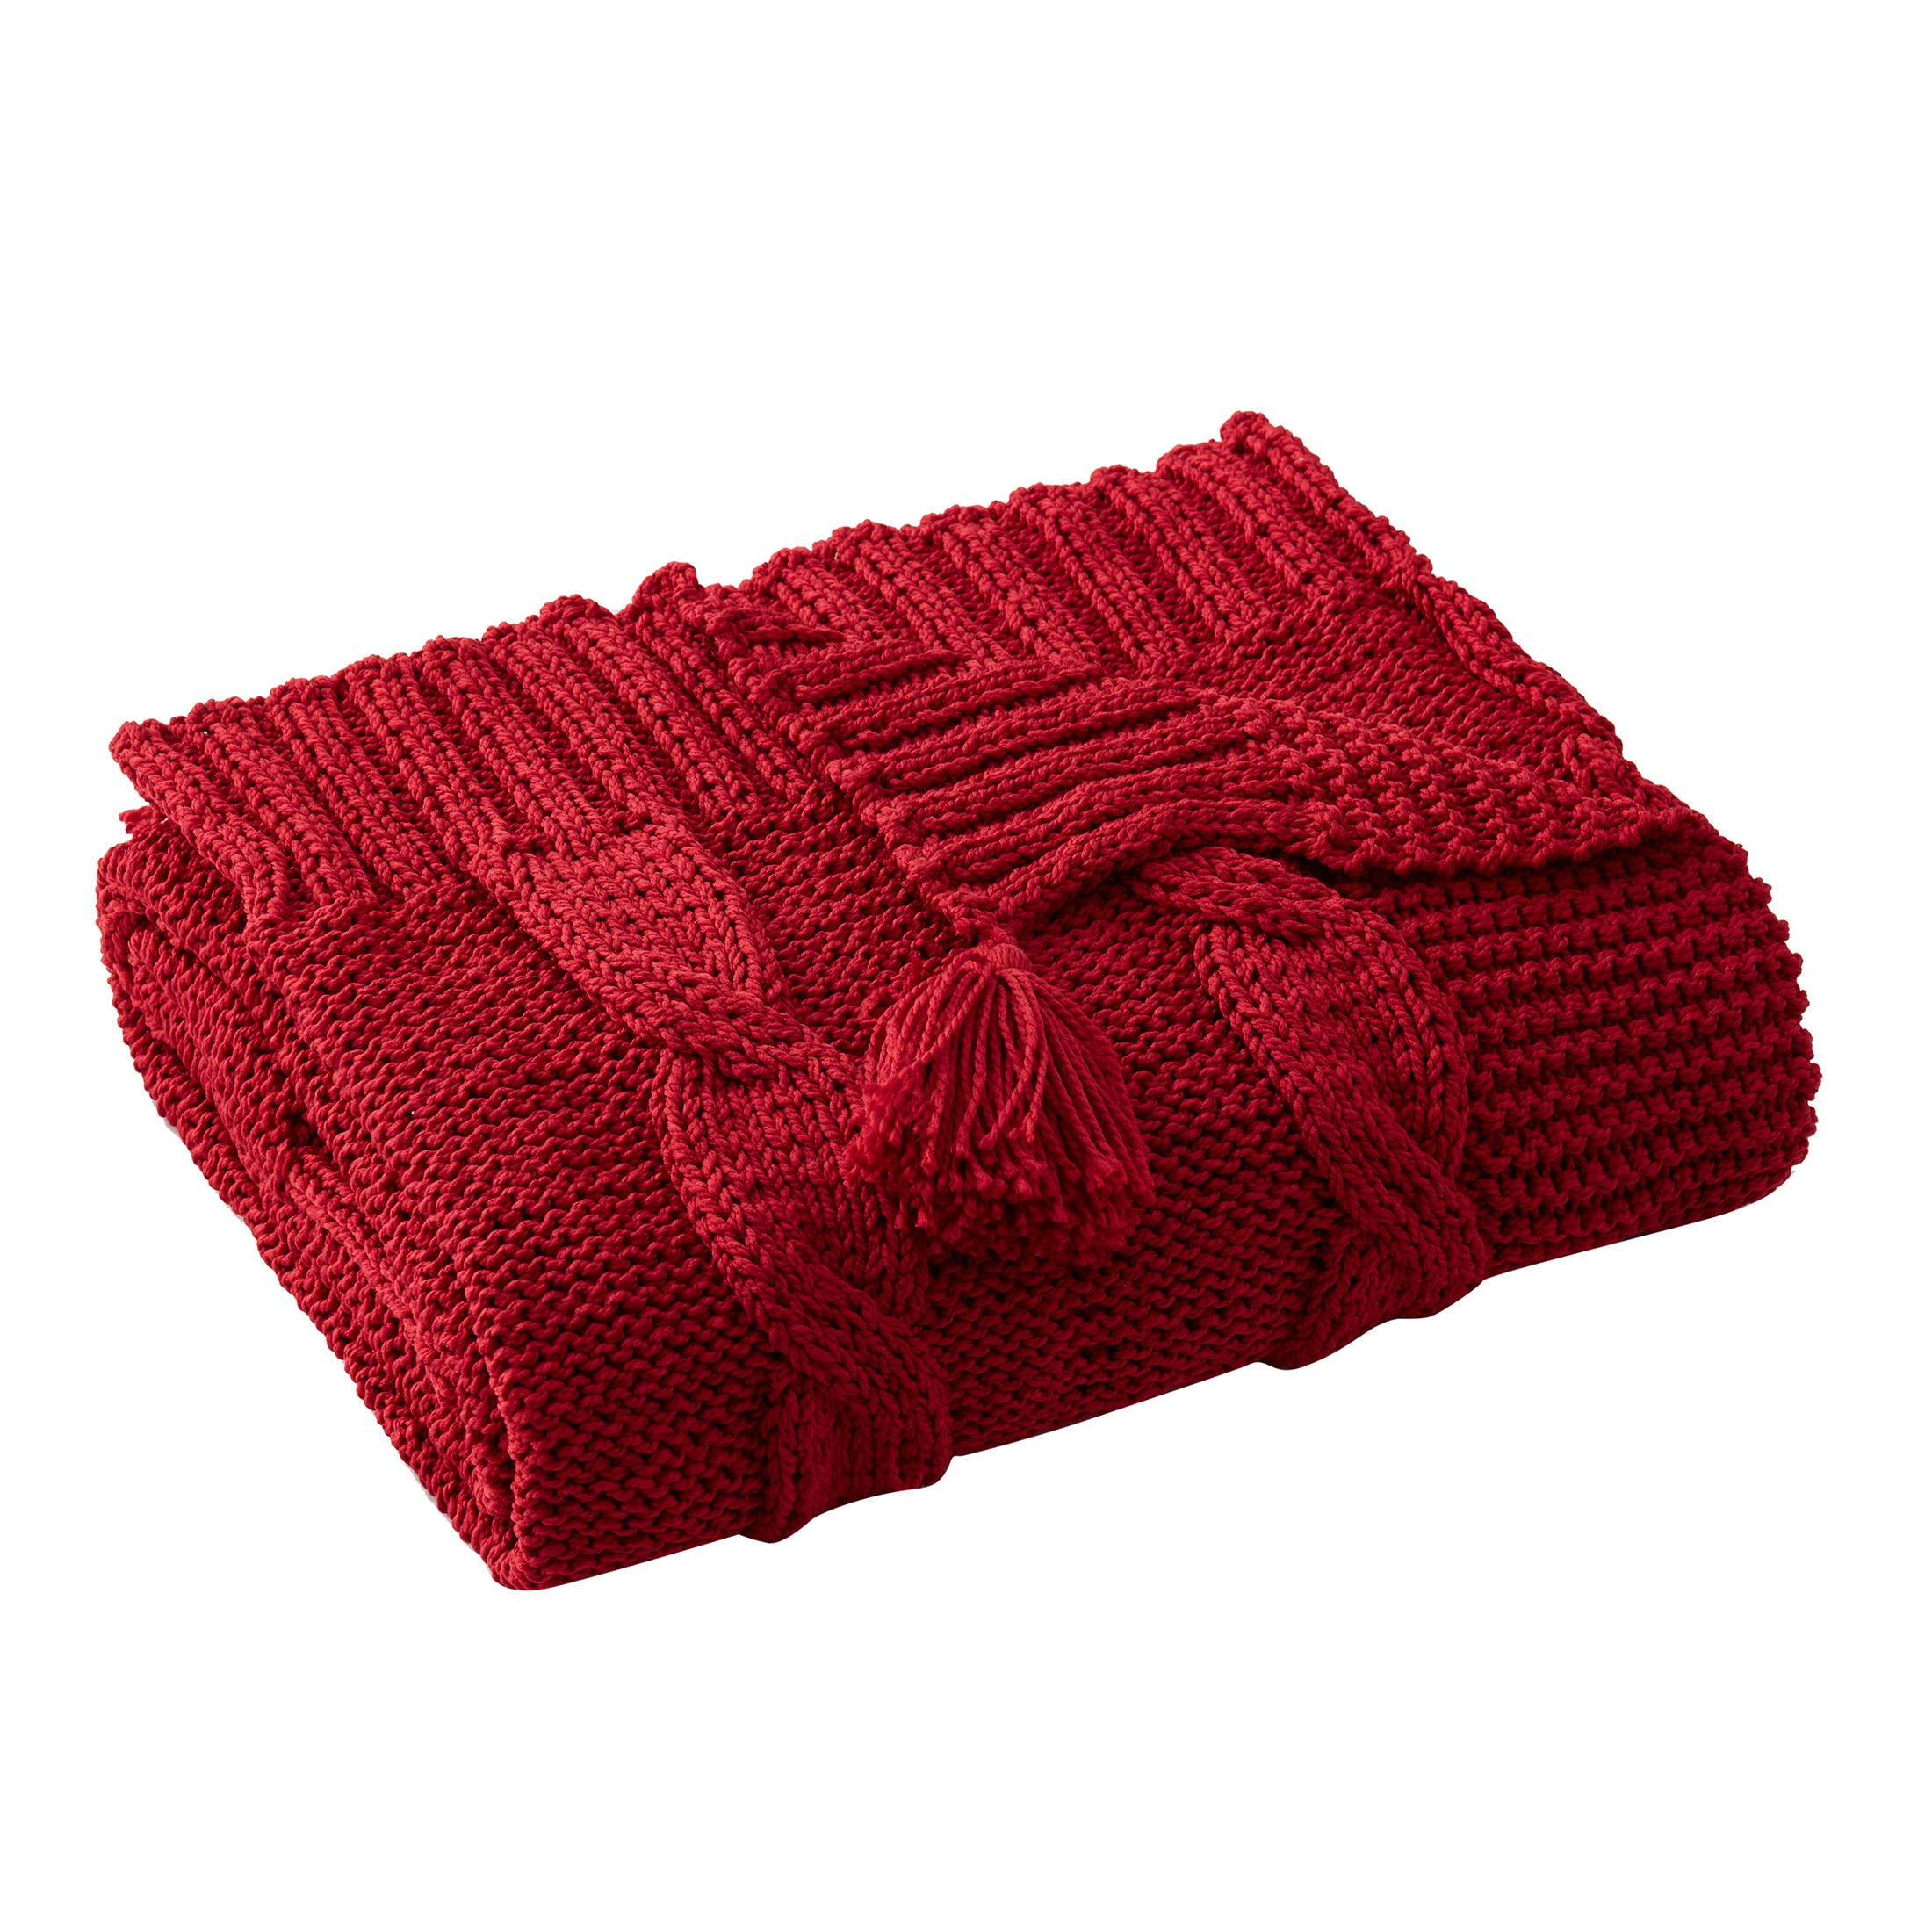 My Texas House Willow Cable Knit Cotton Throw Blanket, Red, Standard Throw - image 3 of 5